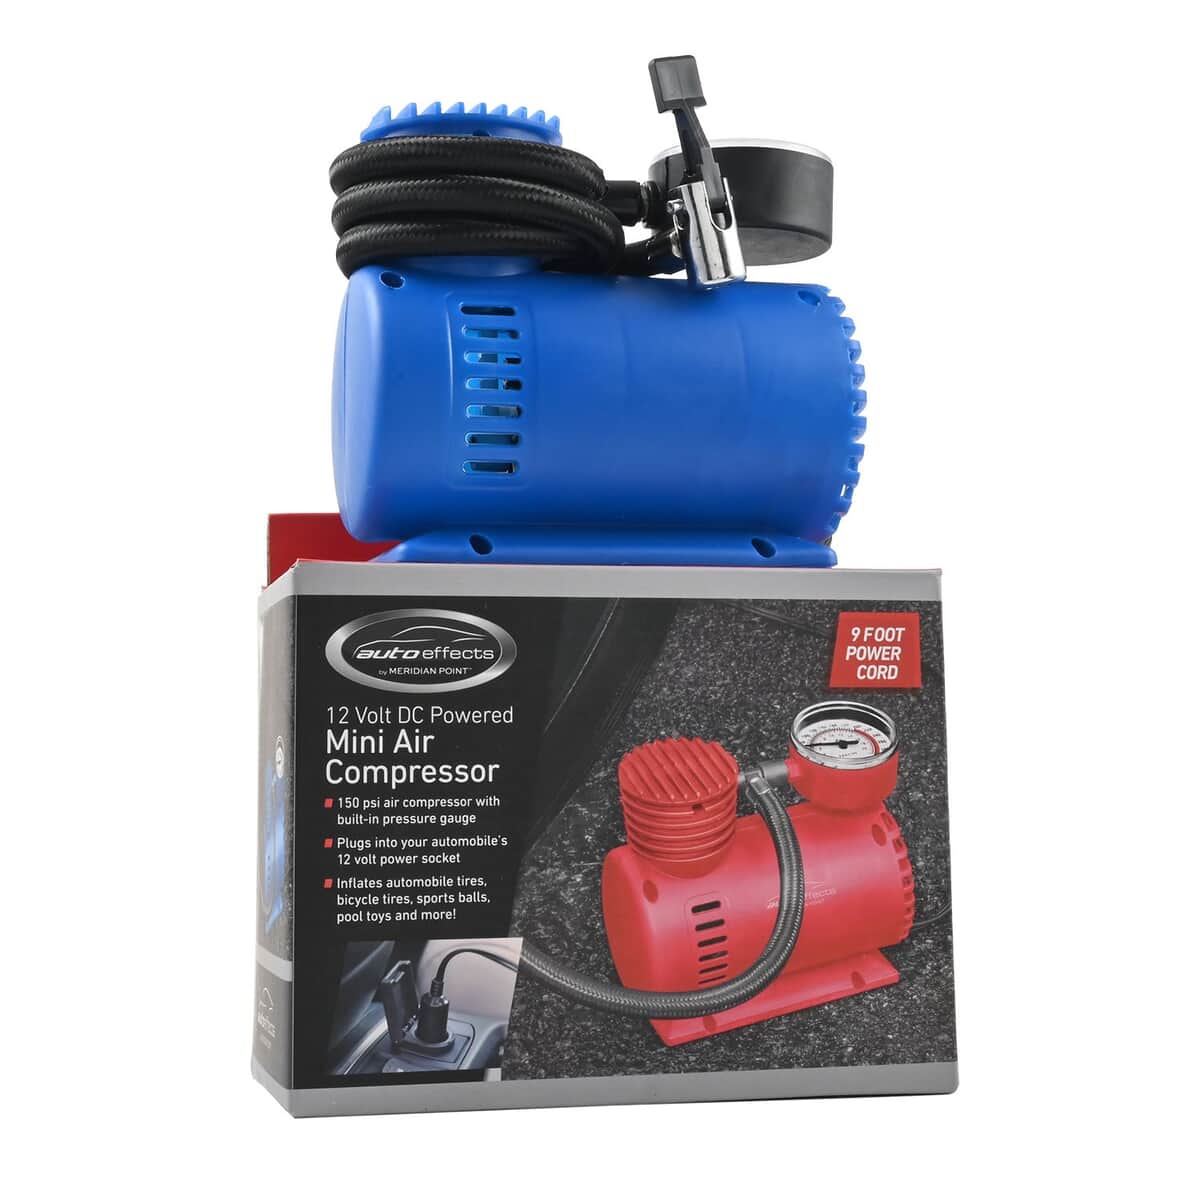 Barcelona Verantwoordelijk persoon kin Buy AUTO EFFECTS Blue Portable Mini Air Compressor for Tire Inflation,  12Volt DC Powered, Built-in Pressure Gauge, Inflates Automobile tires, Bike  tires at ShopLC.